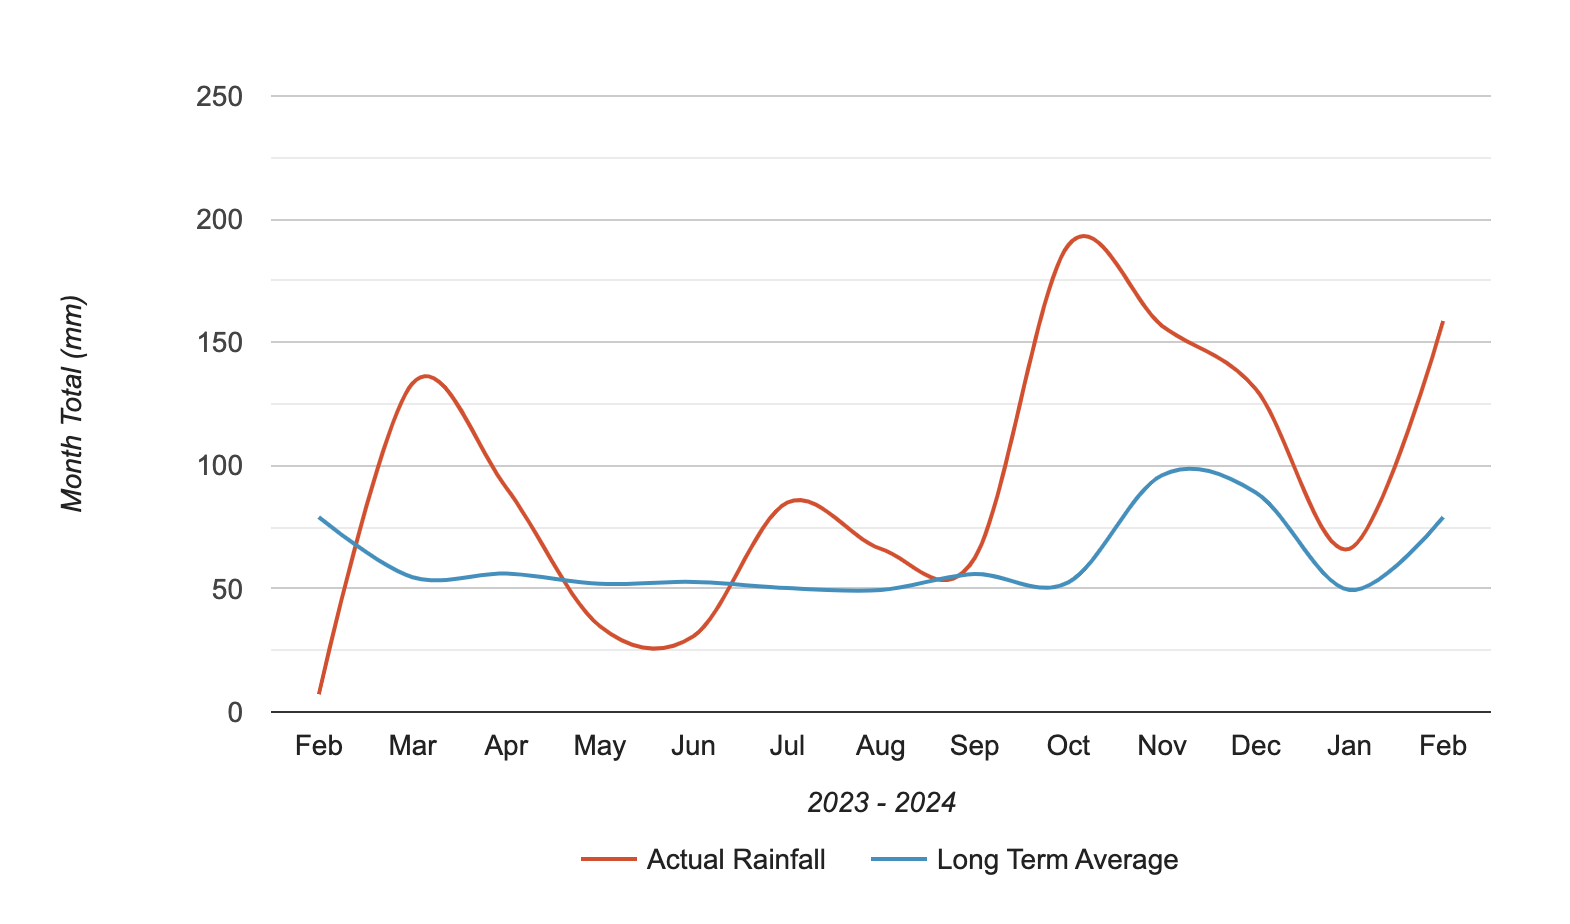 Graph showing actual rainfall compared to long term average rainfall